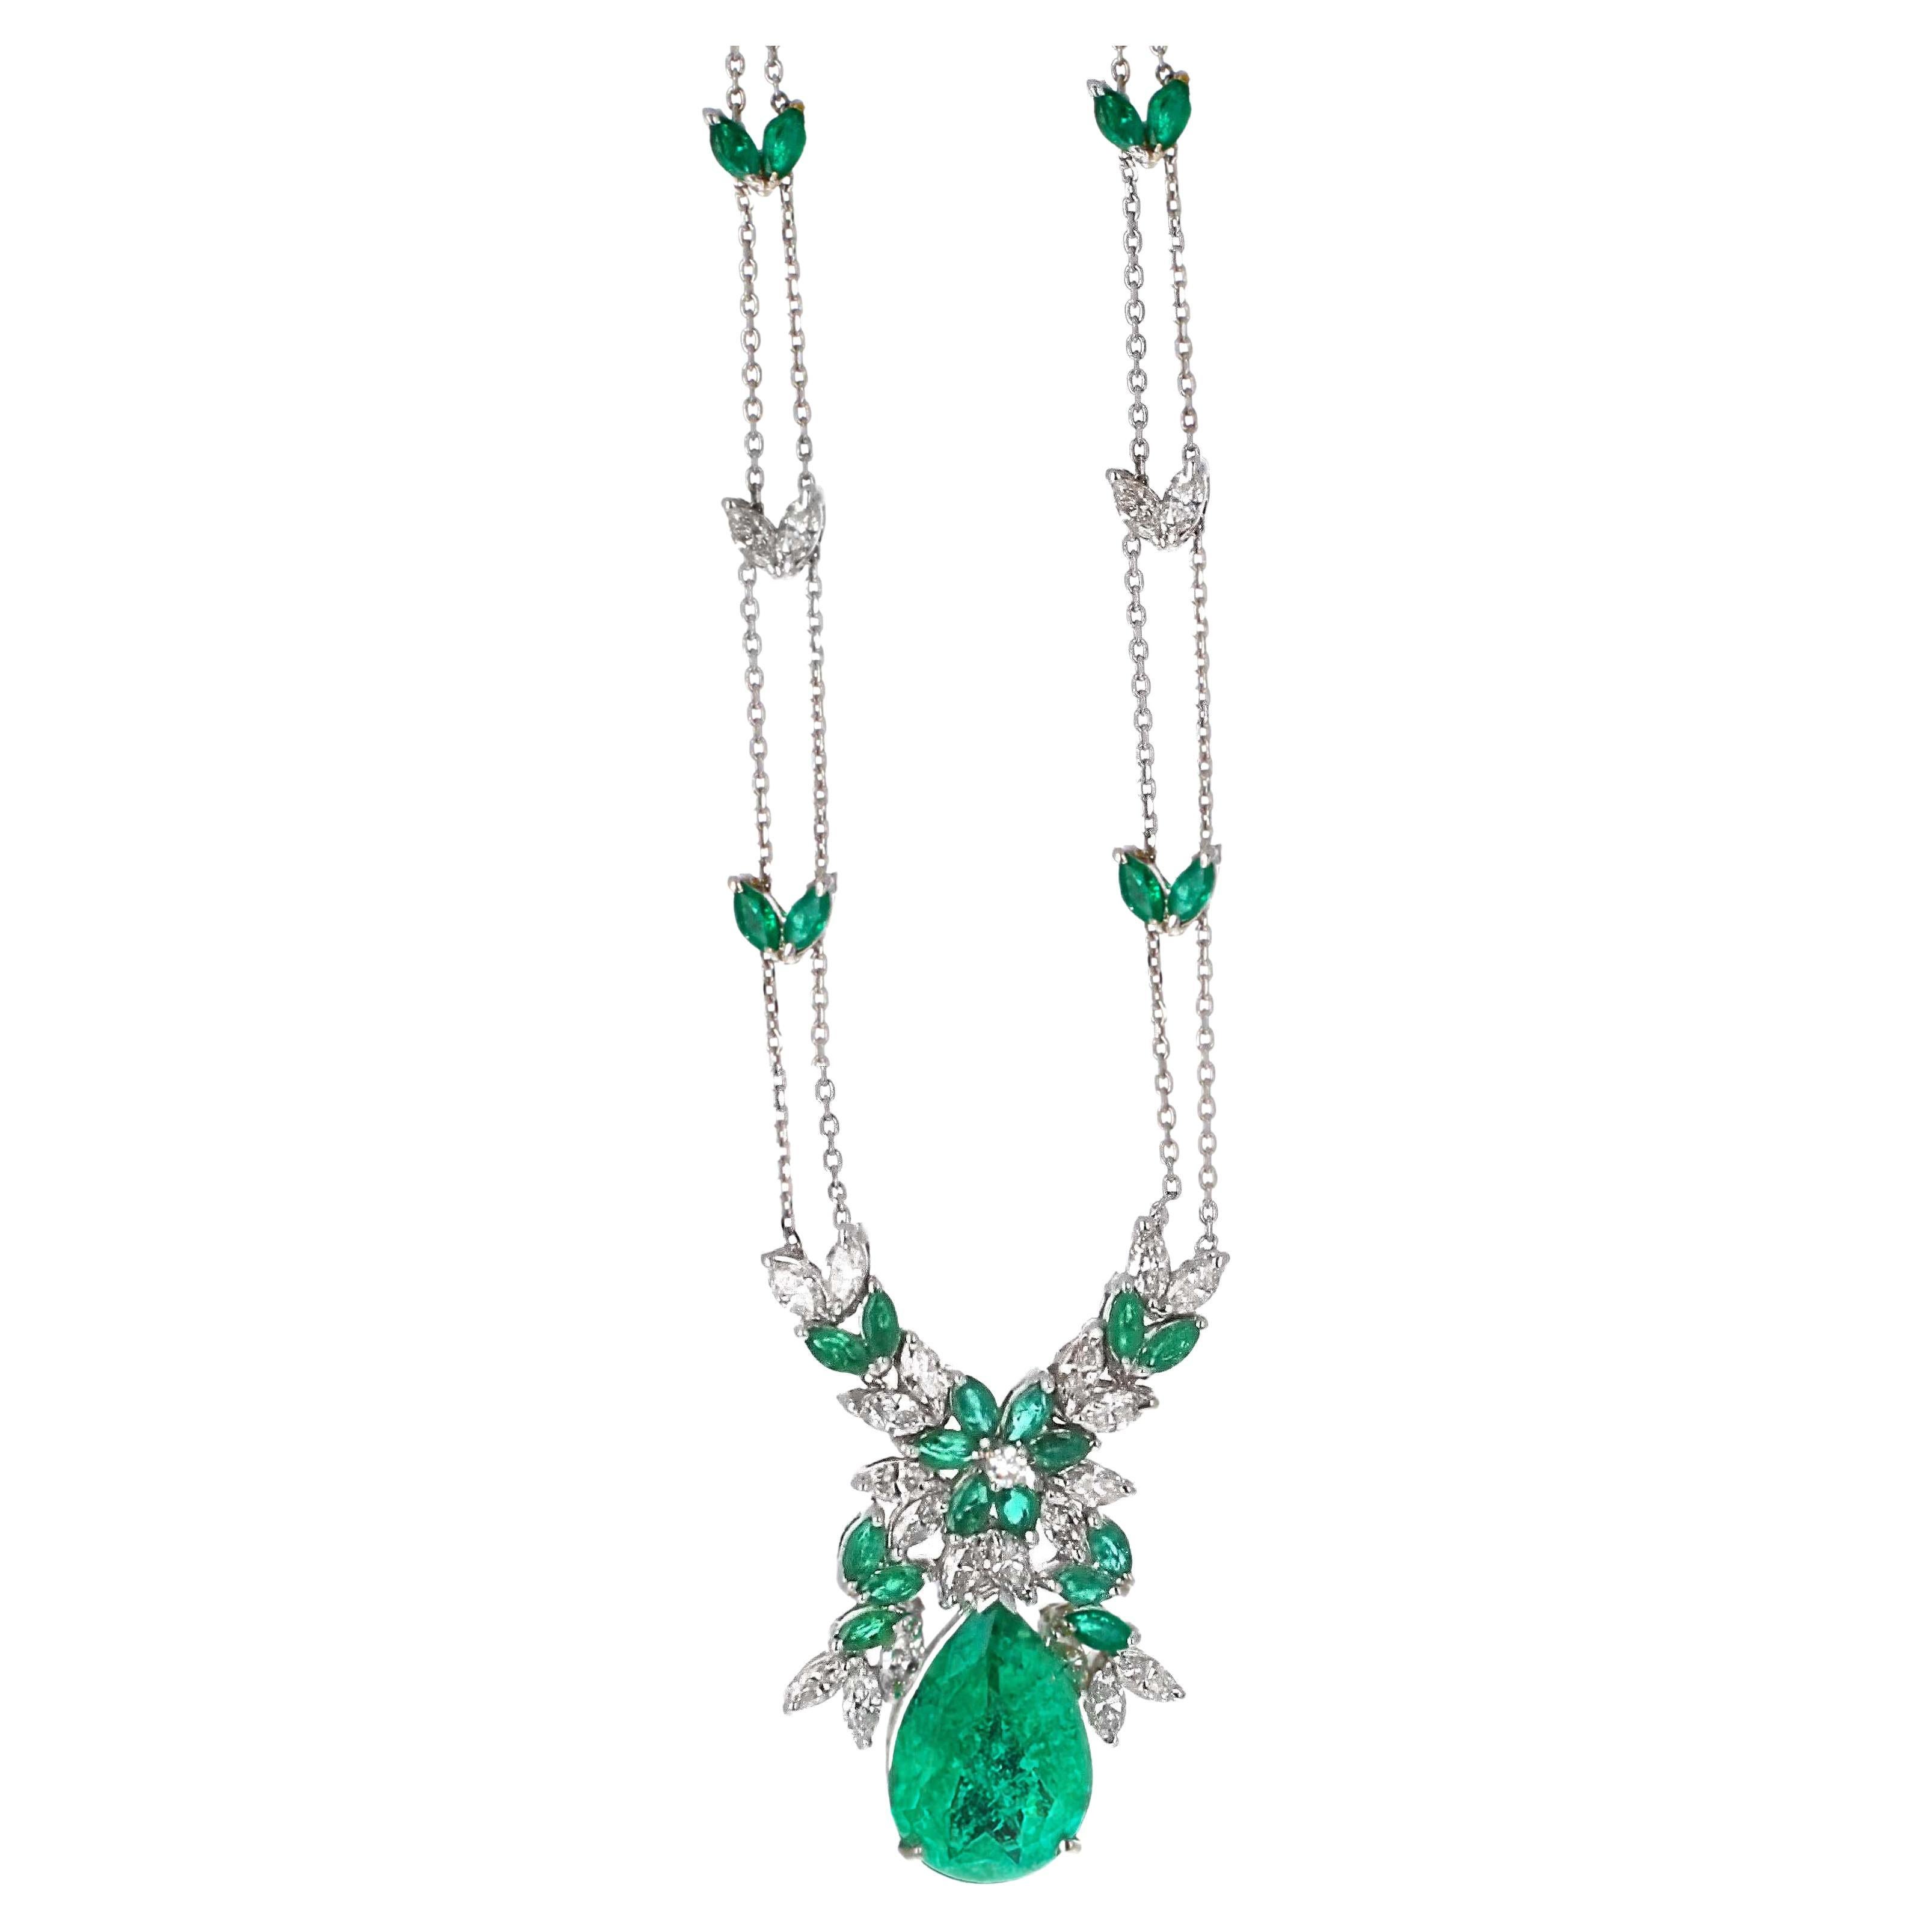 GIA certified Colombian pear shape emerald and diamond necklace pendant—a true gem of sophistication and elegance.
This pendant features a captivating 11.72-carat Colombian pear-shaped emerald, certified by GIA, measuring 19.91 x 13.95 x 8.45 mm.